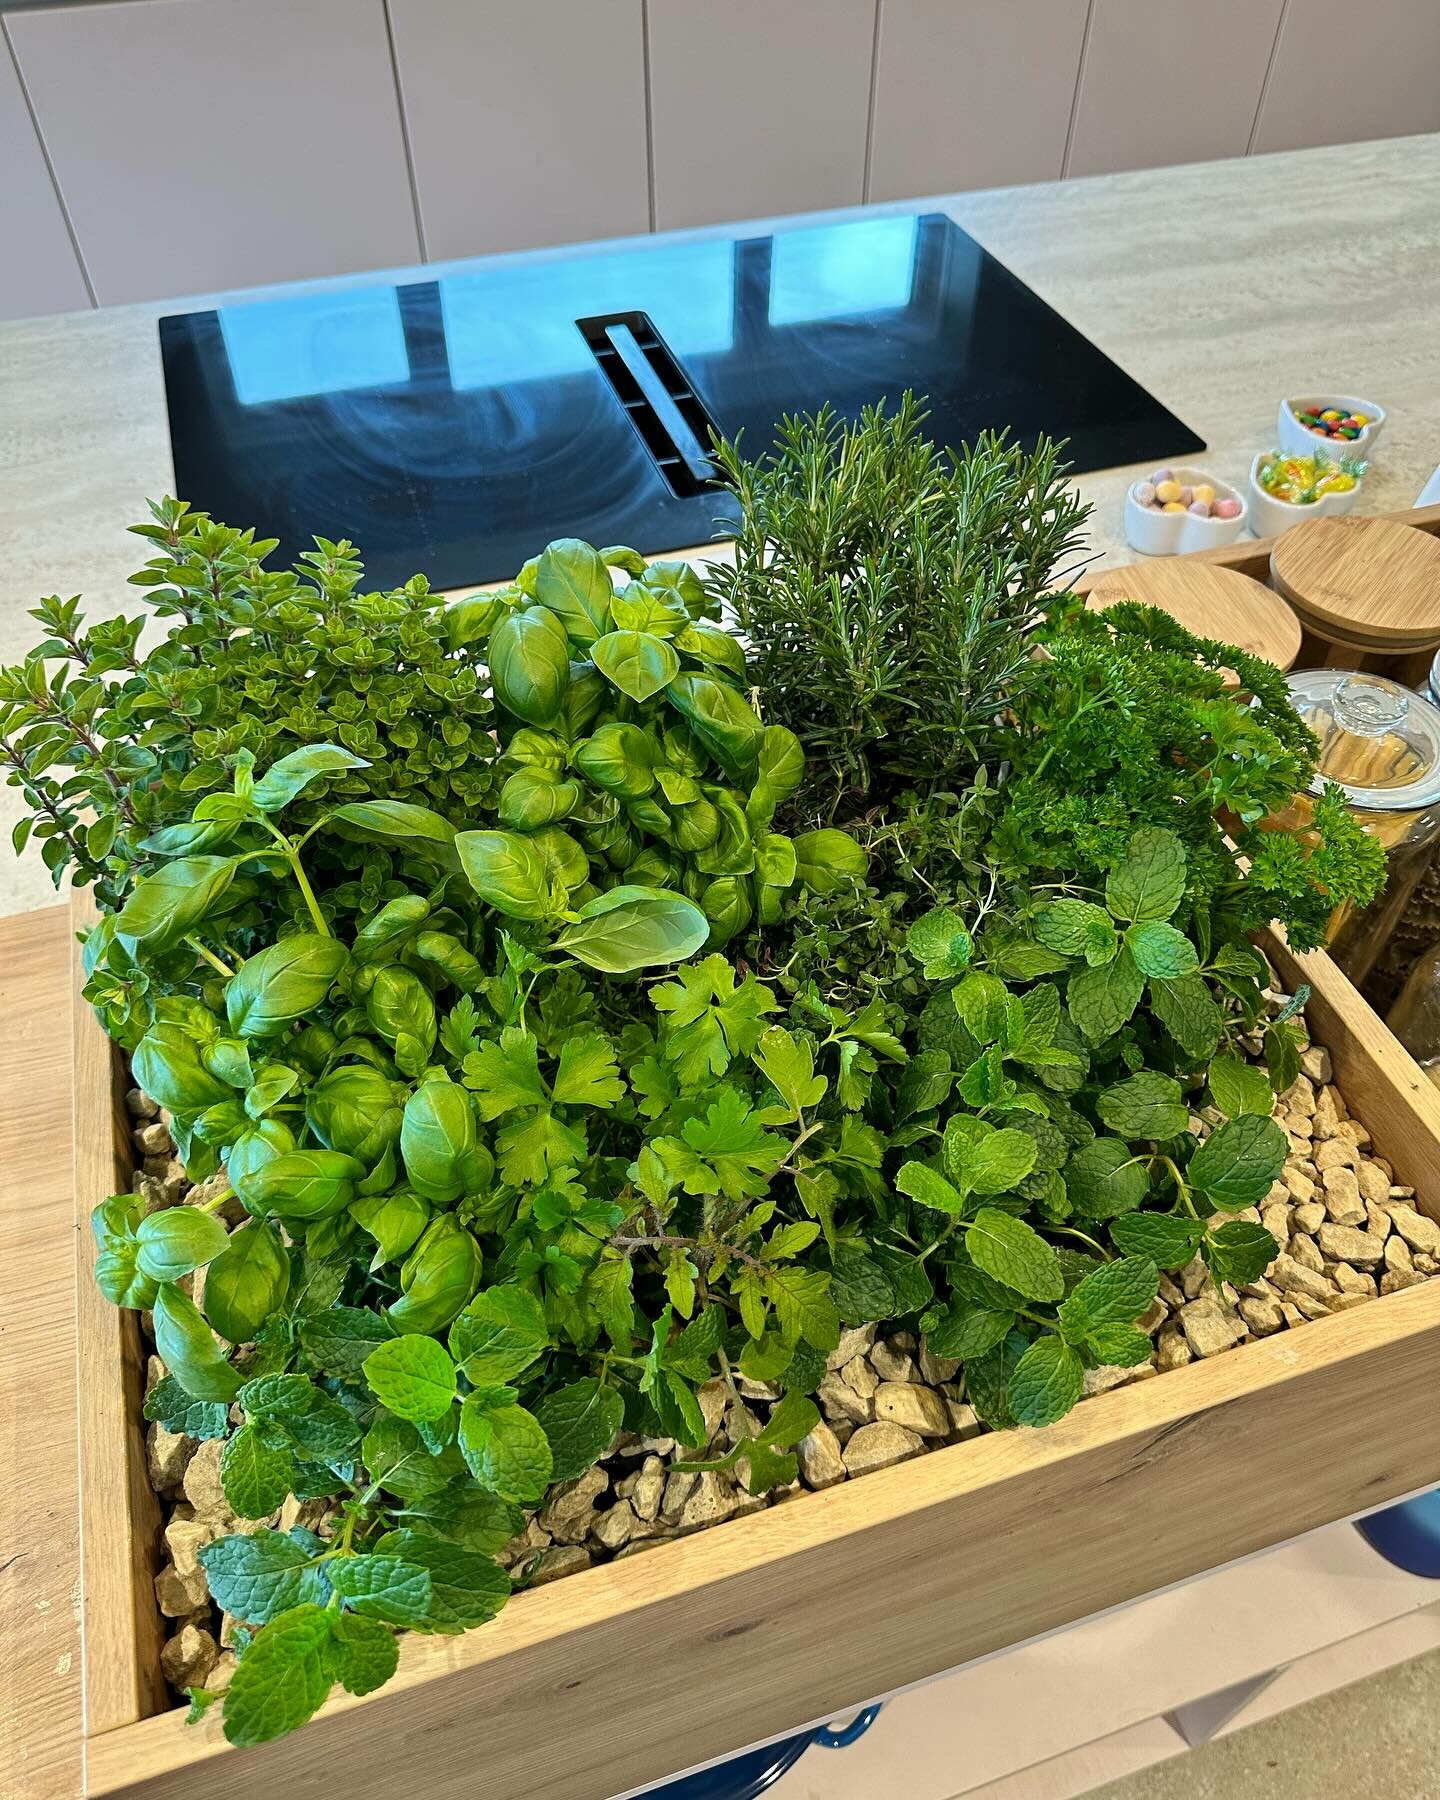 This freshly planted herb garden adds character and life to the kitchen island. The planter is full of fresh herbs waiting to be harvested for supper. This has to be the kitchen must have for 2024! Tell us what you think of this idea, comment below. 